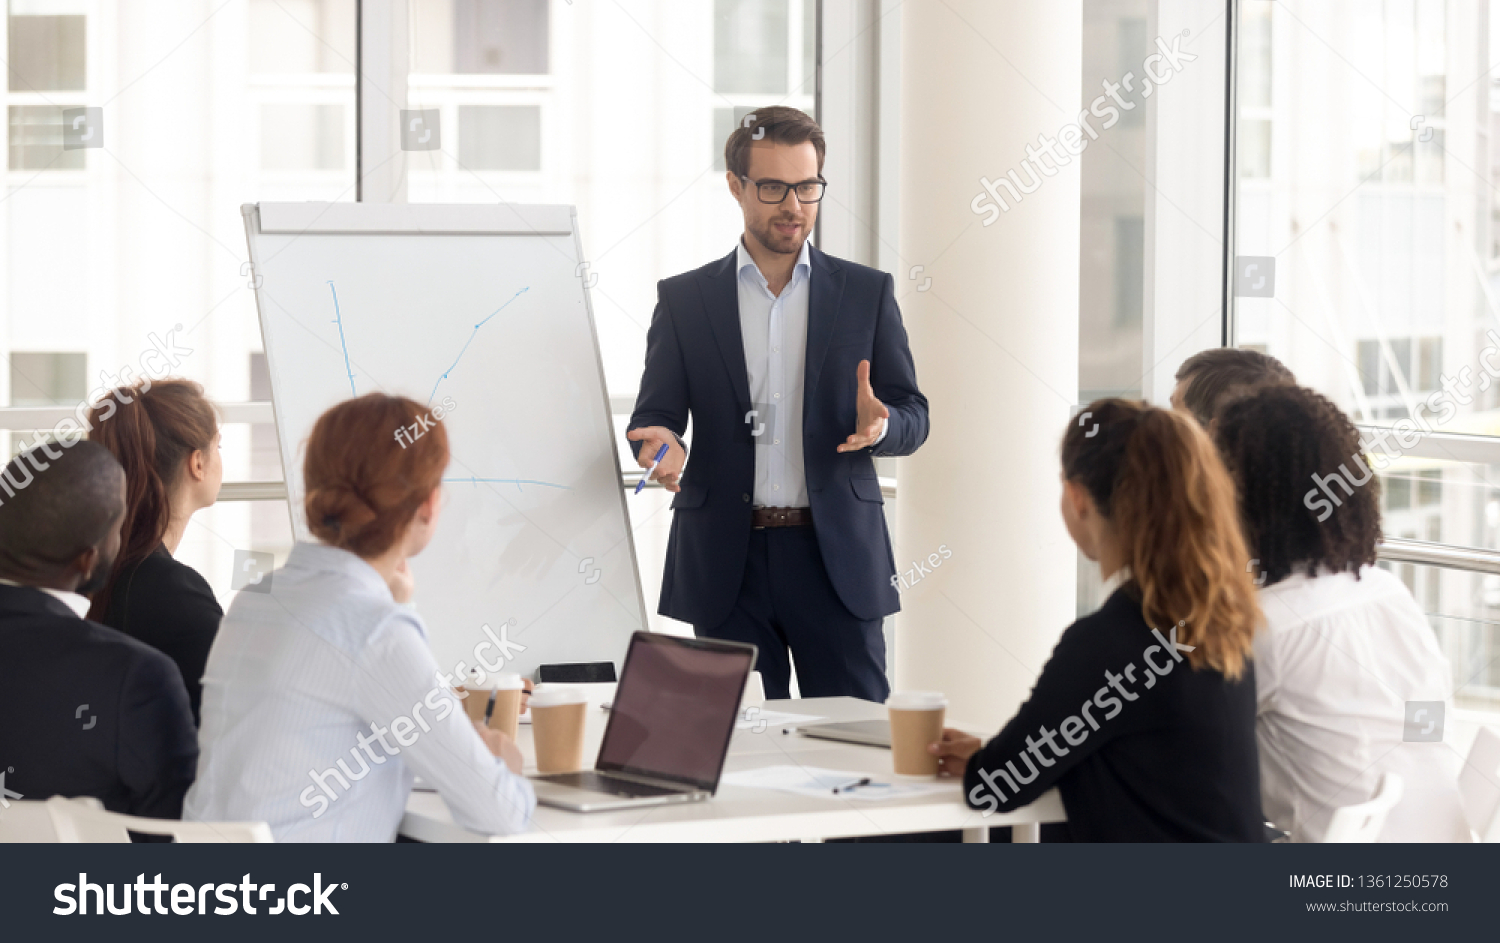 Male business coach speaker in suit give flipchart presentation, speaker presenter consulting training persuading employees client group, mentor leader explain graph strategy at team meeting workshop #1361250578